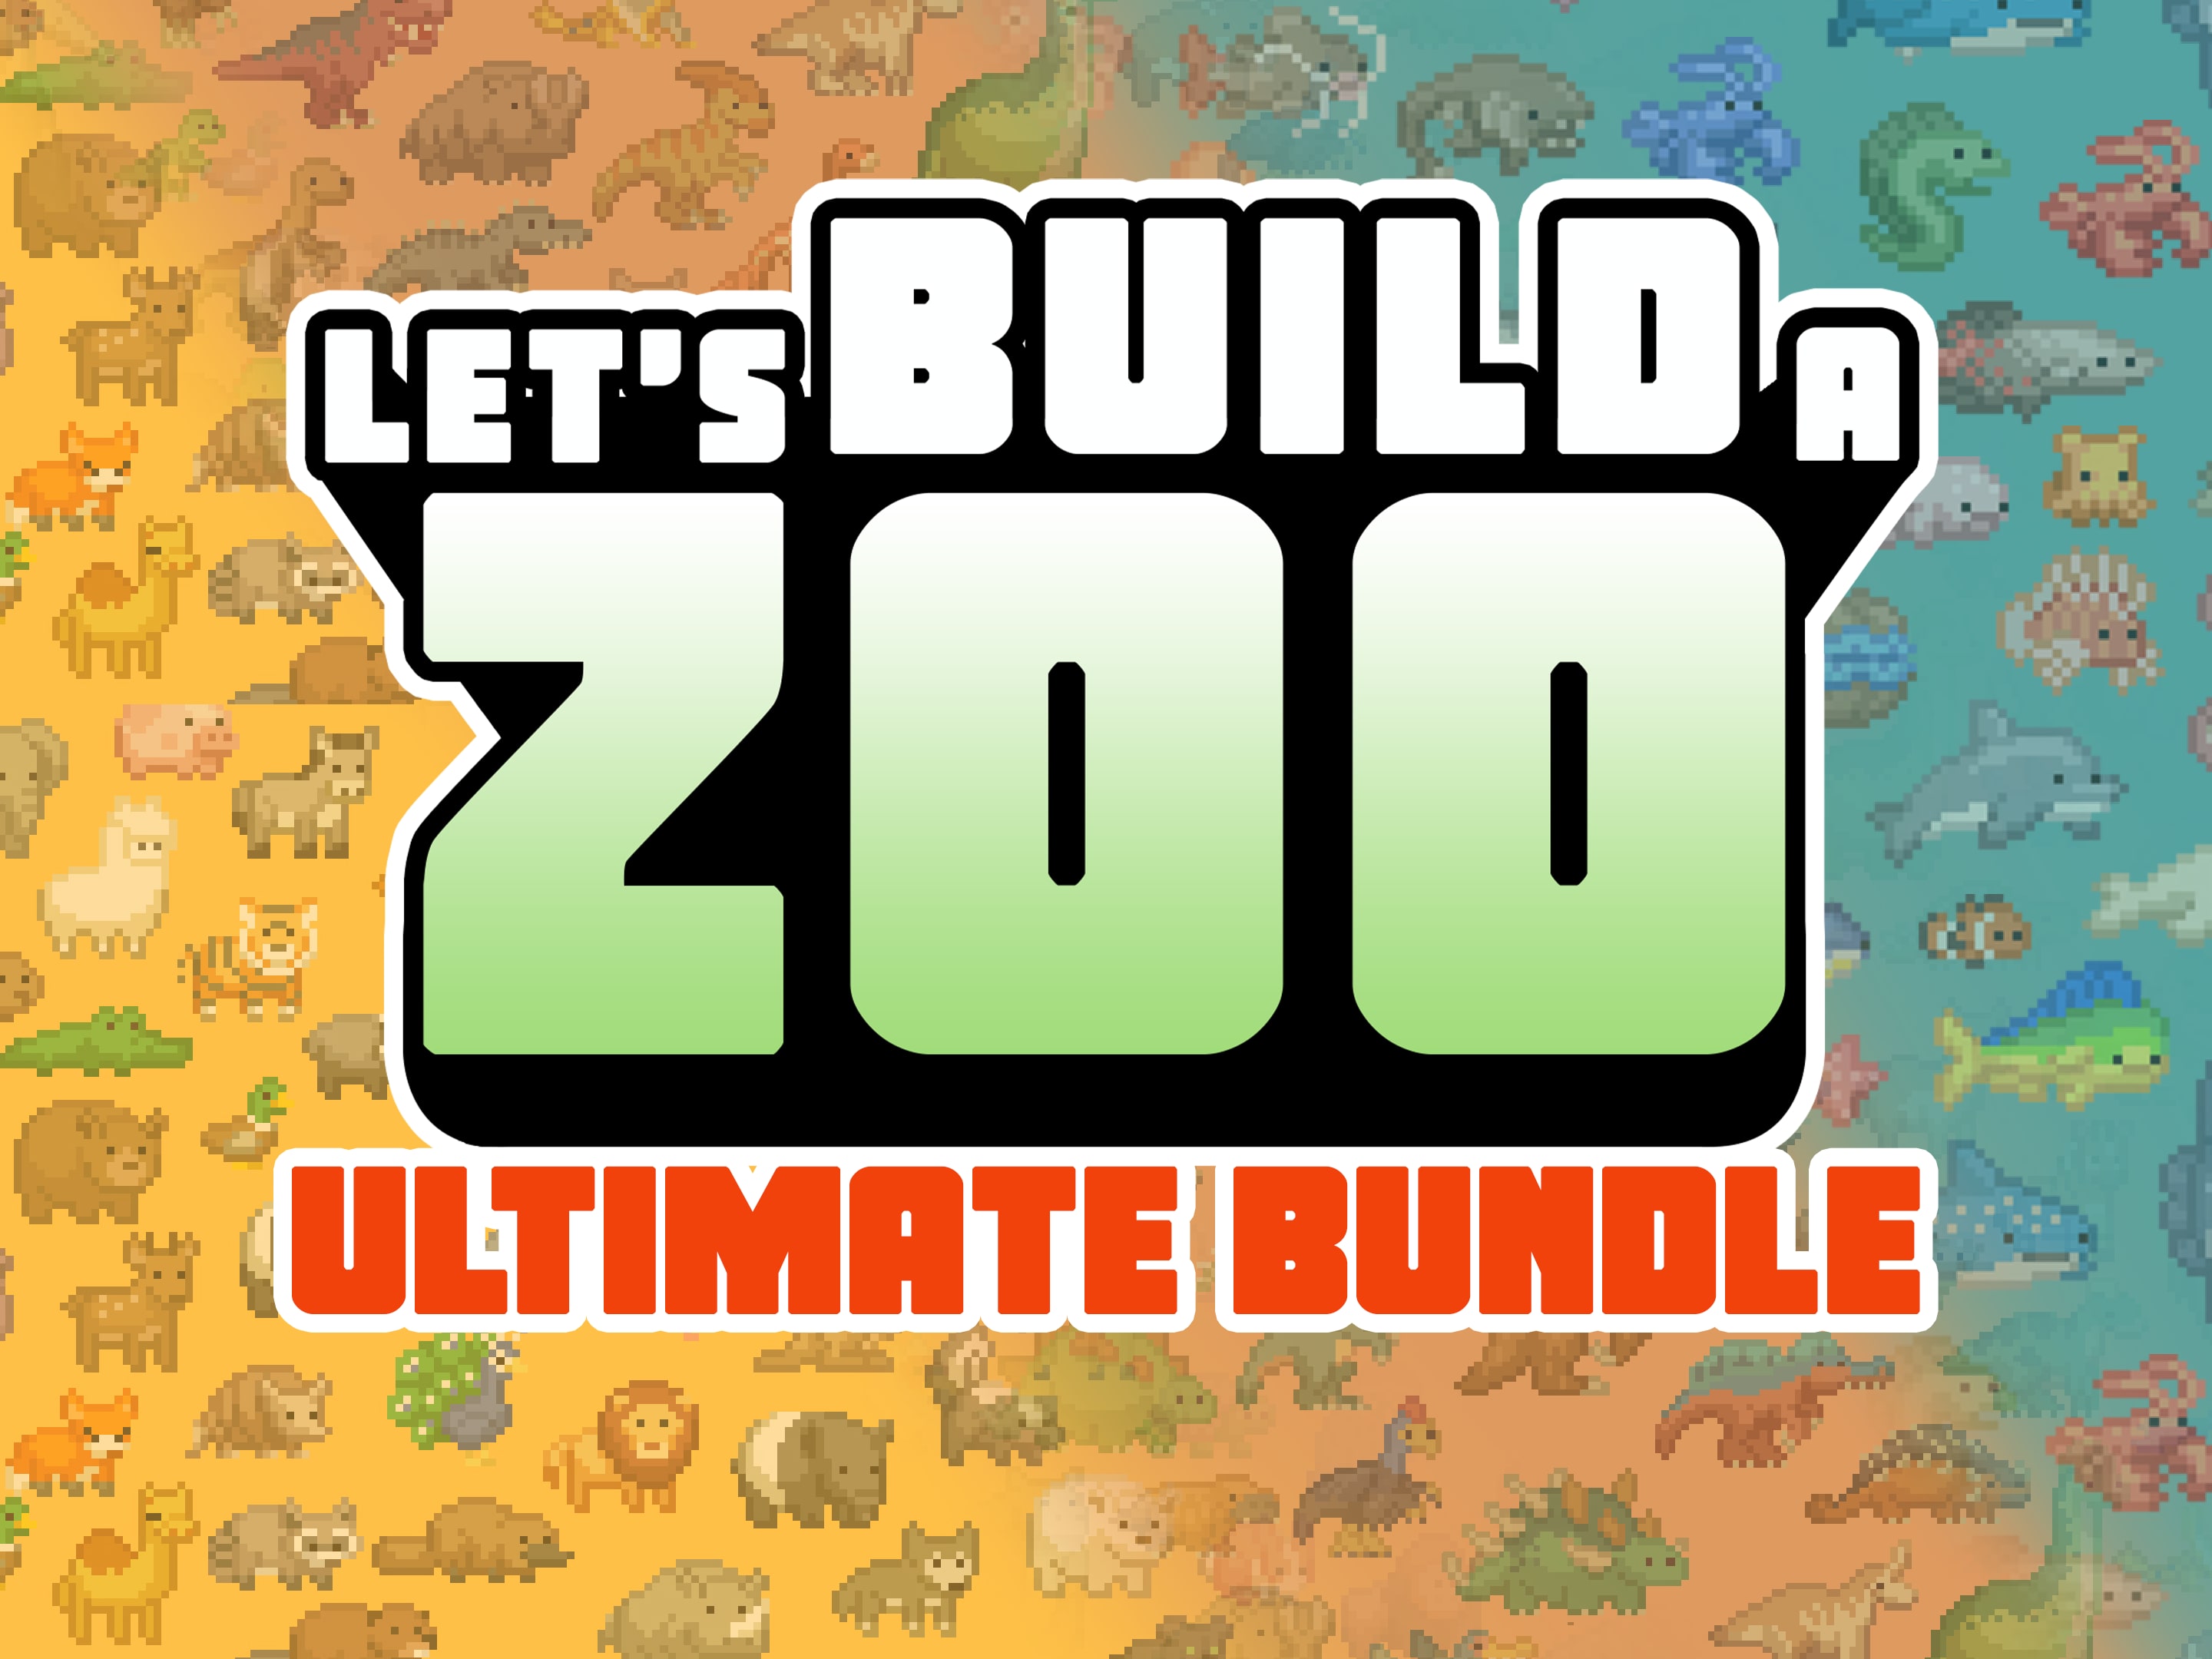 Let's Build a Zoo - PS4 - Brand New, Factory Sealed 819335021334